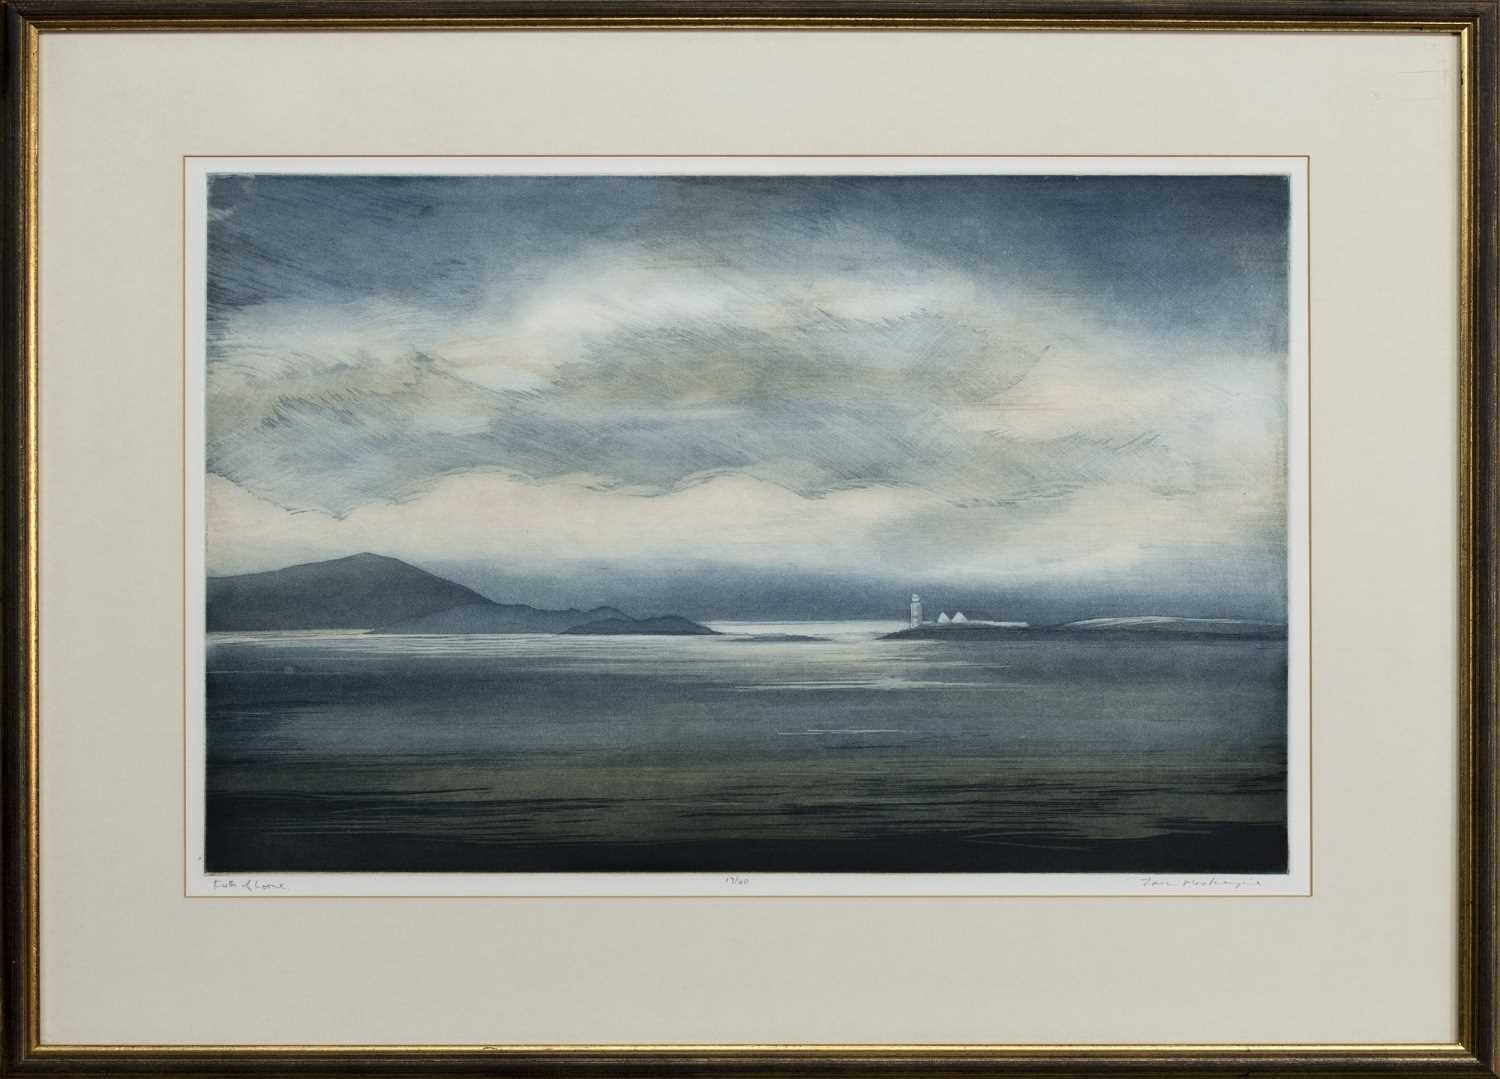 FIRTH OF LORN, AN ETCHING BY TOM MACKENZIE